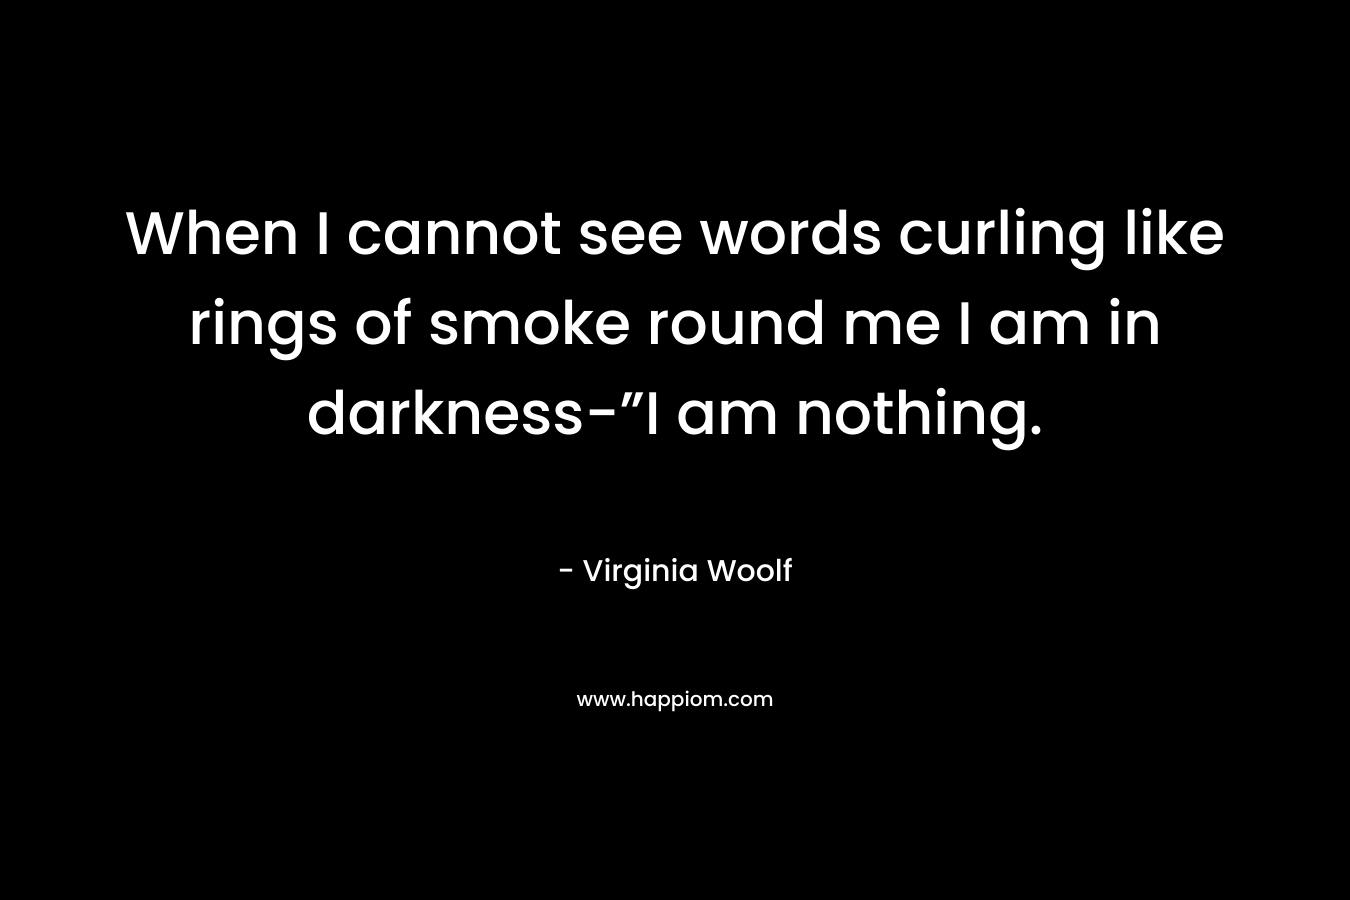 When I cannot see words curling like rings of smoke round me I am in darkness-”I am nothing.